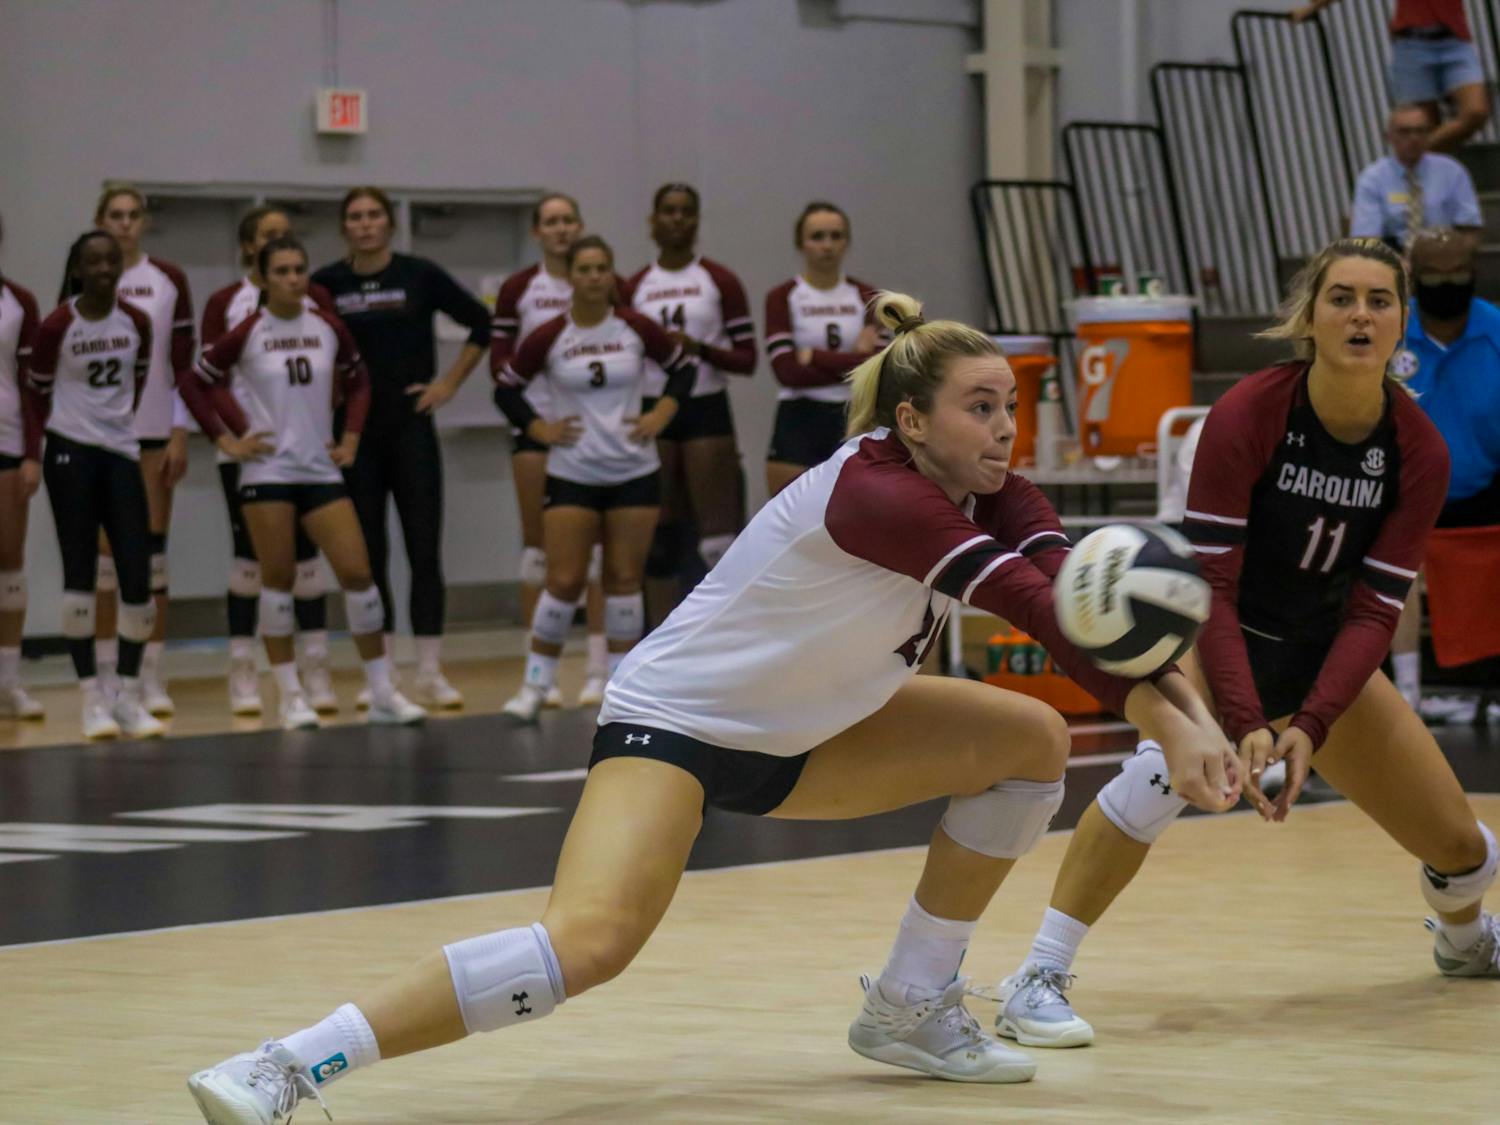 Junior outside hitter Riley Whitesides sets the ball during a game against Sacred Heart on Friday, Aug. 26, 2022.